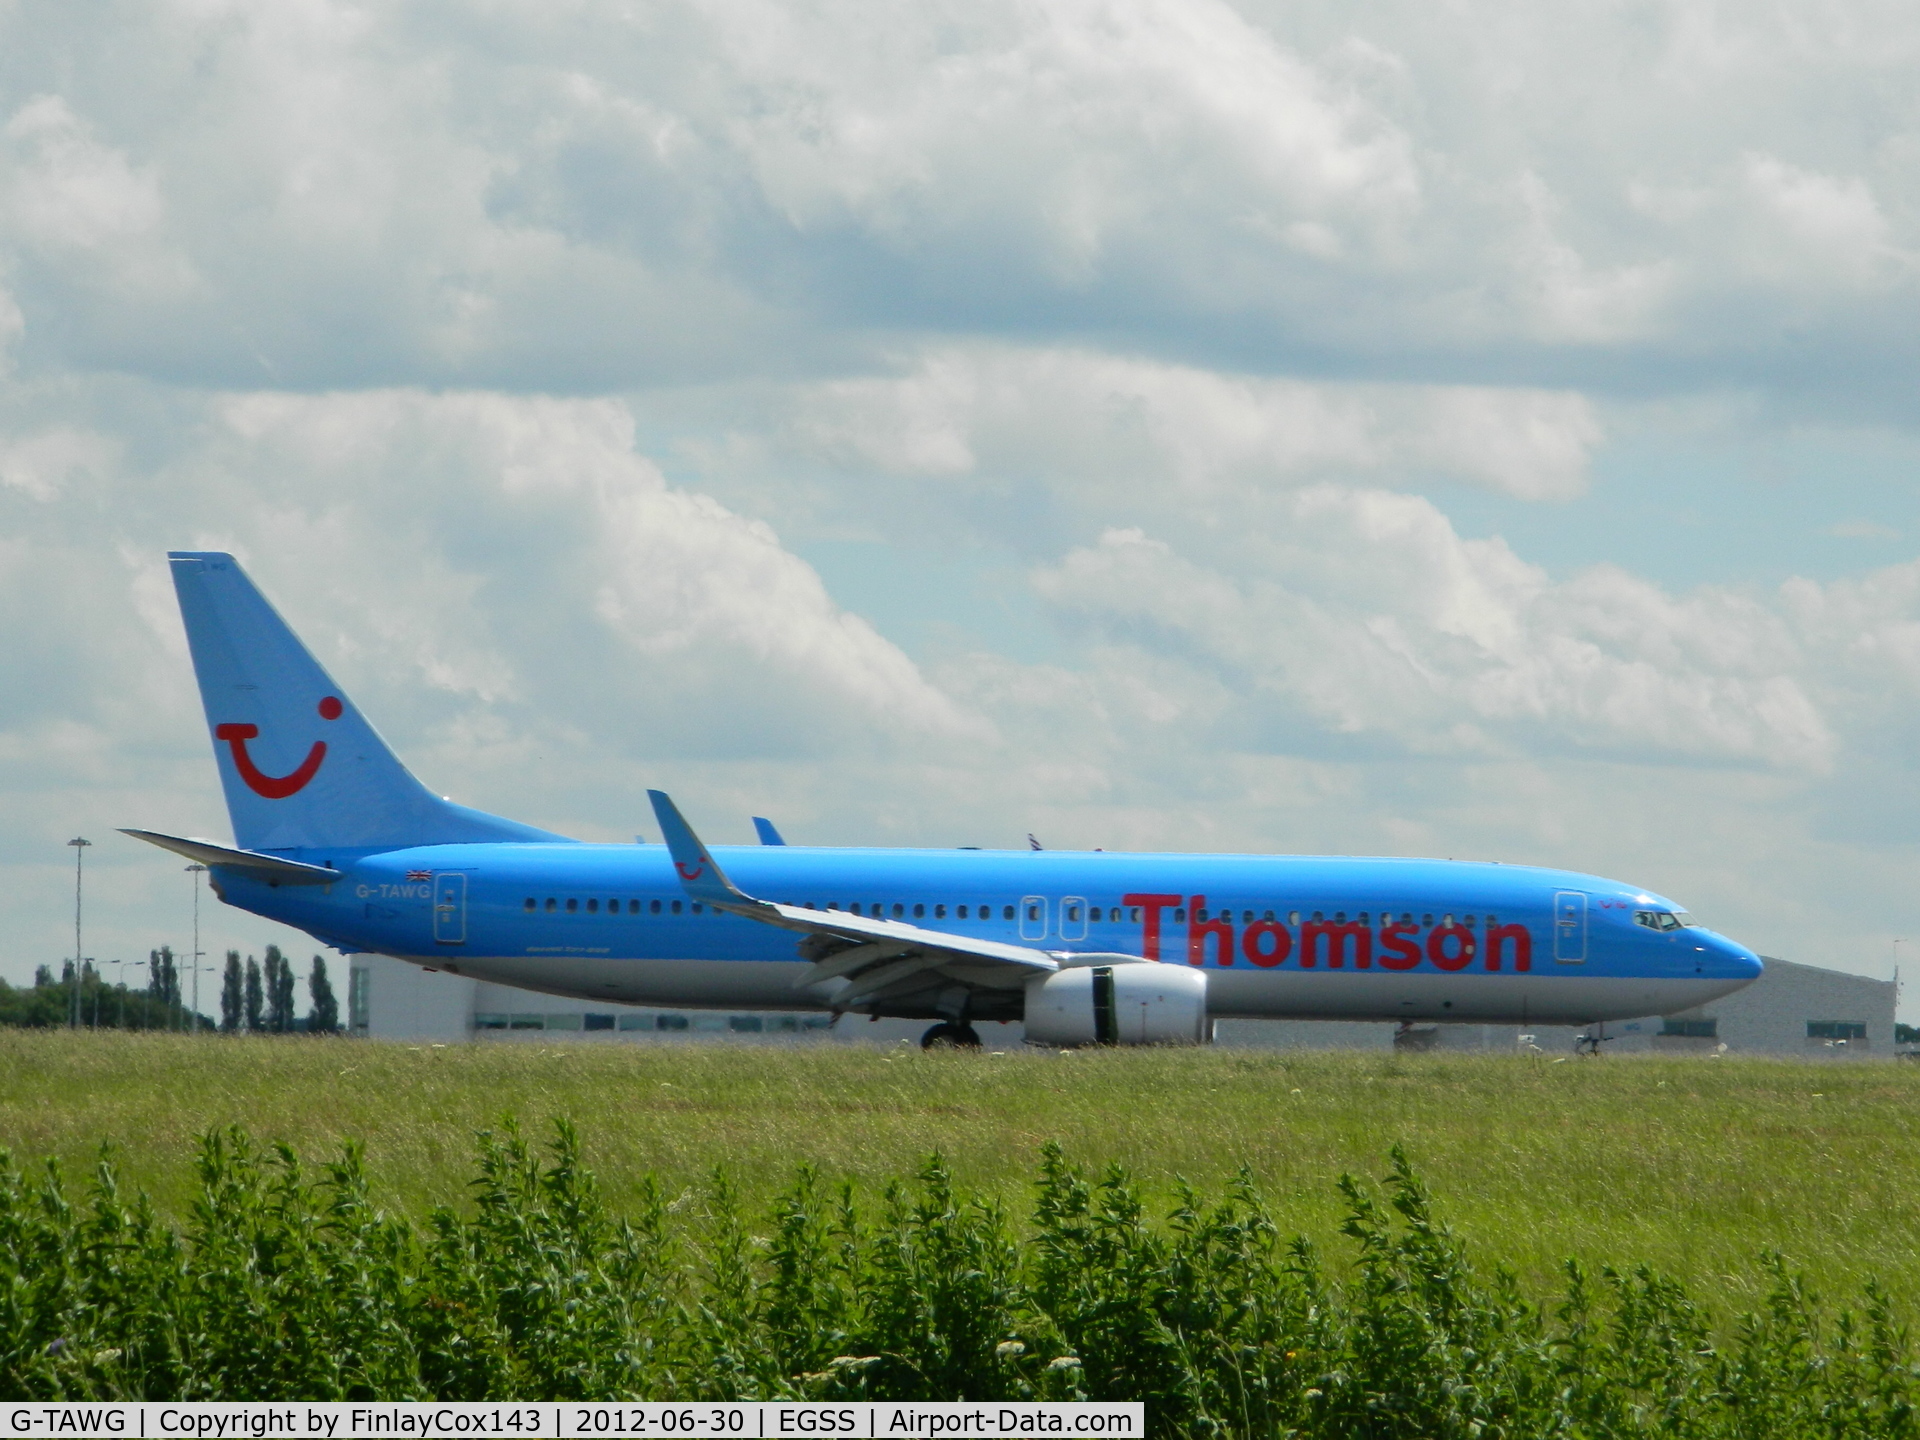 G-TAWG, 2012 Boeing 737-8K5 C/N 37266, Thomson Boeing 737-8K5 at London Stansted